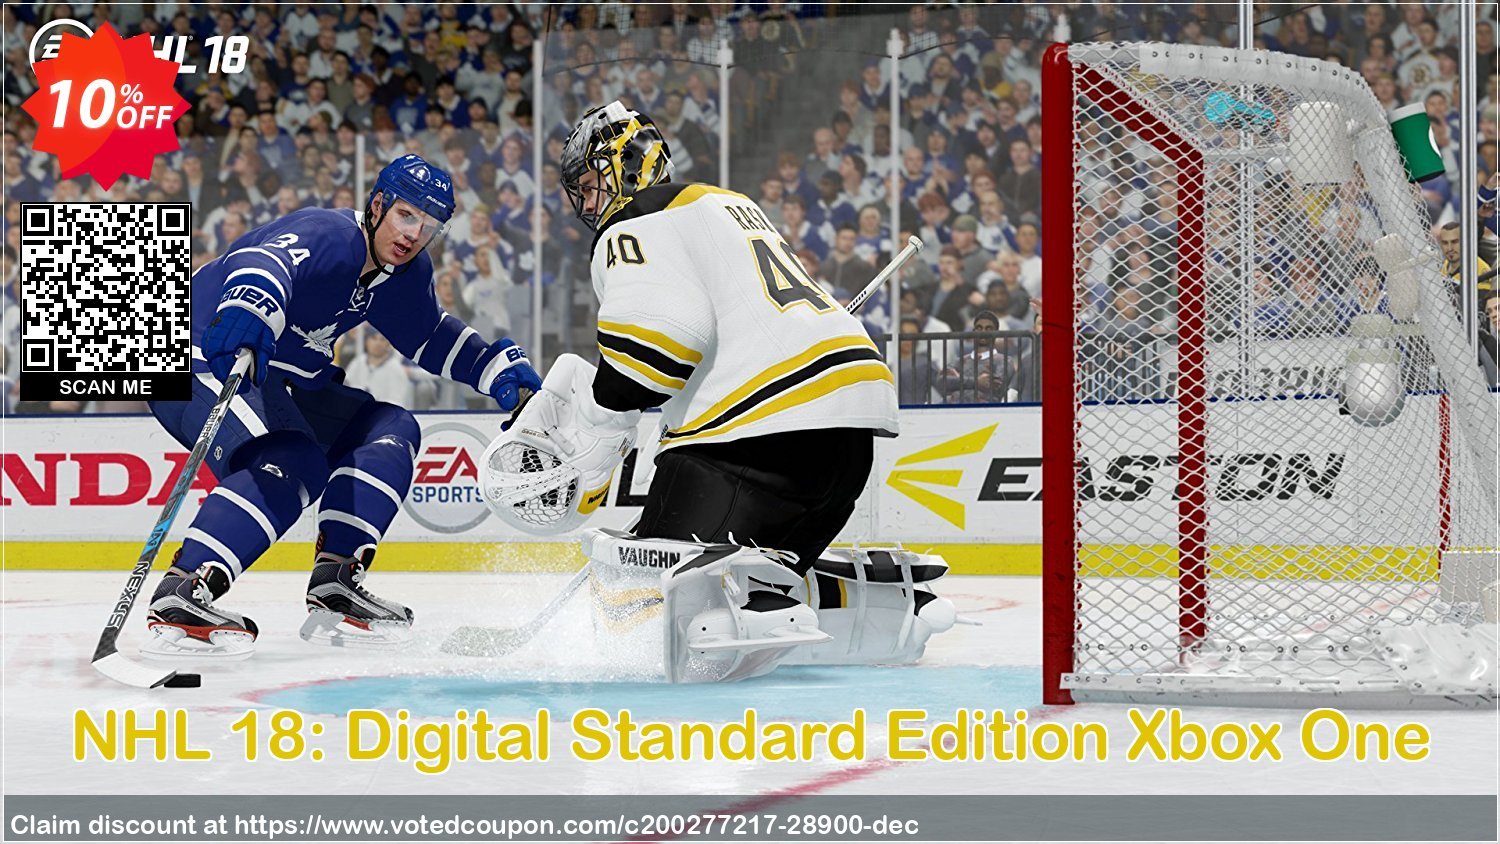 NHL 18: Digital Standard Edition Xbox One Coupon Code Apr 2024, 10% OFF - VotedCoupon